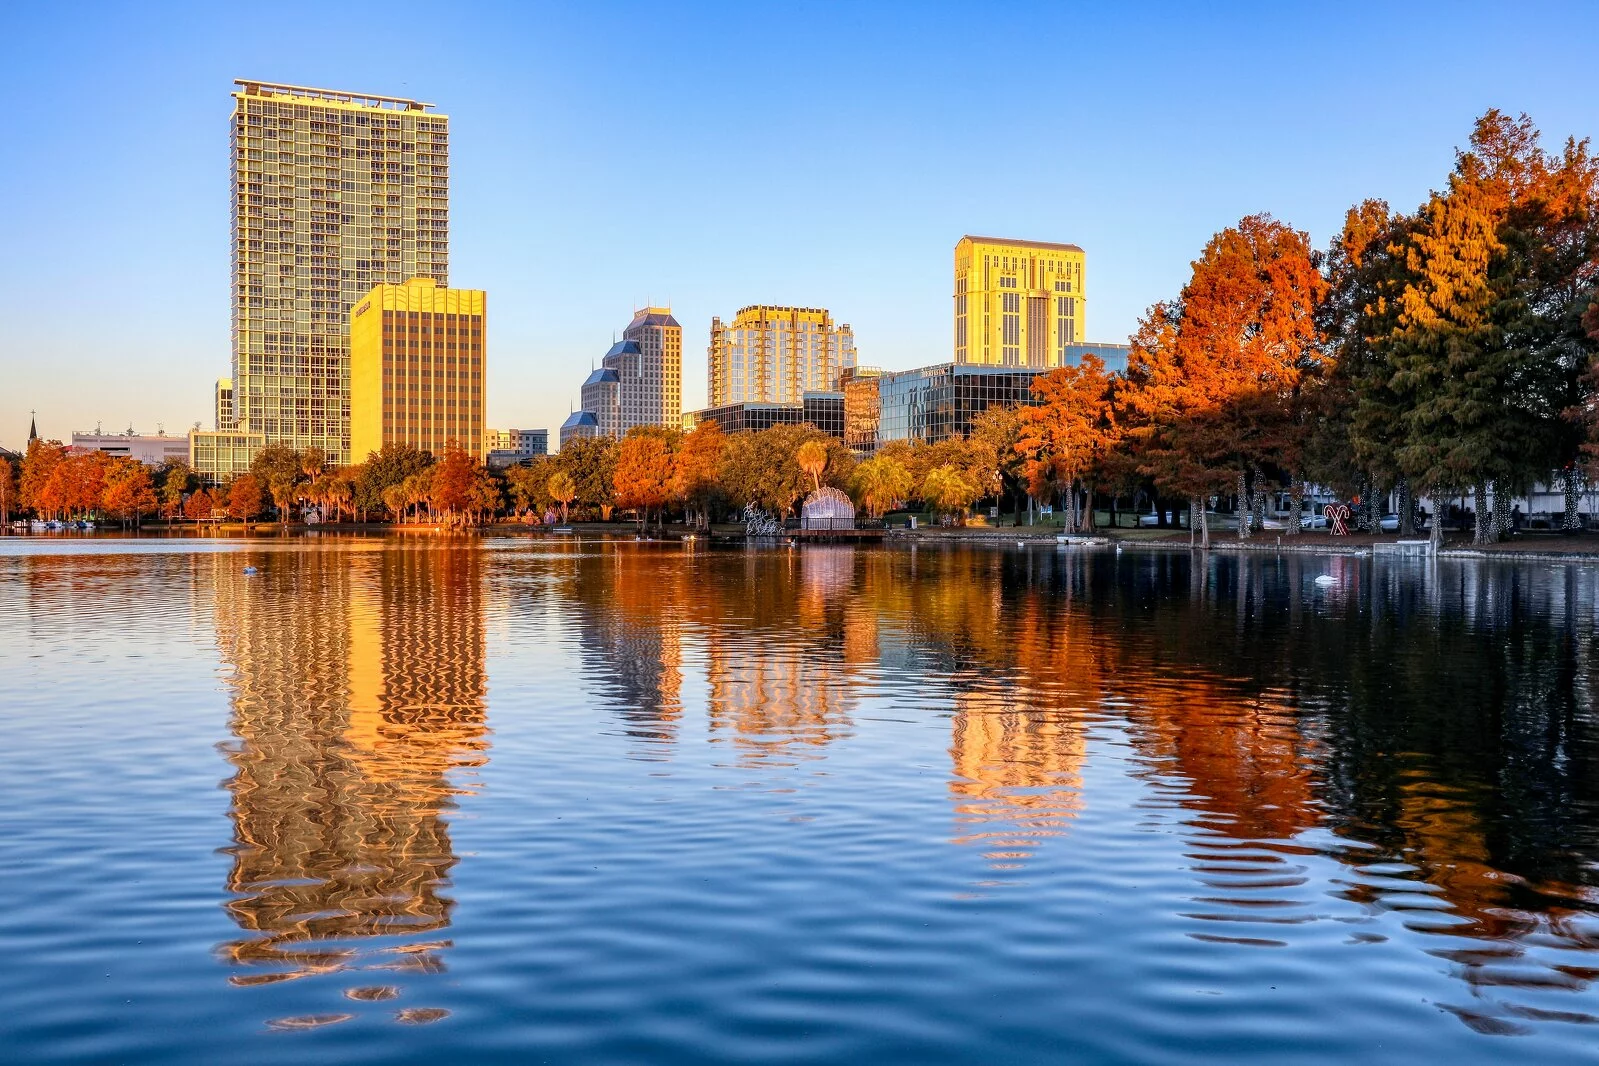 Photo of Orlando, large buildings in the distance, photo taken from a body of water, trees changing colors, photo taken on a sunny day.